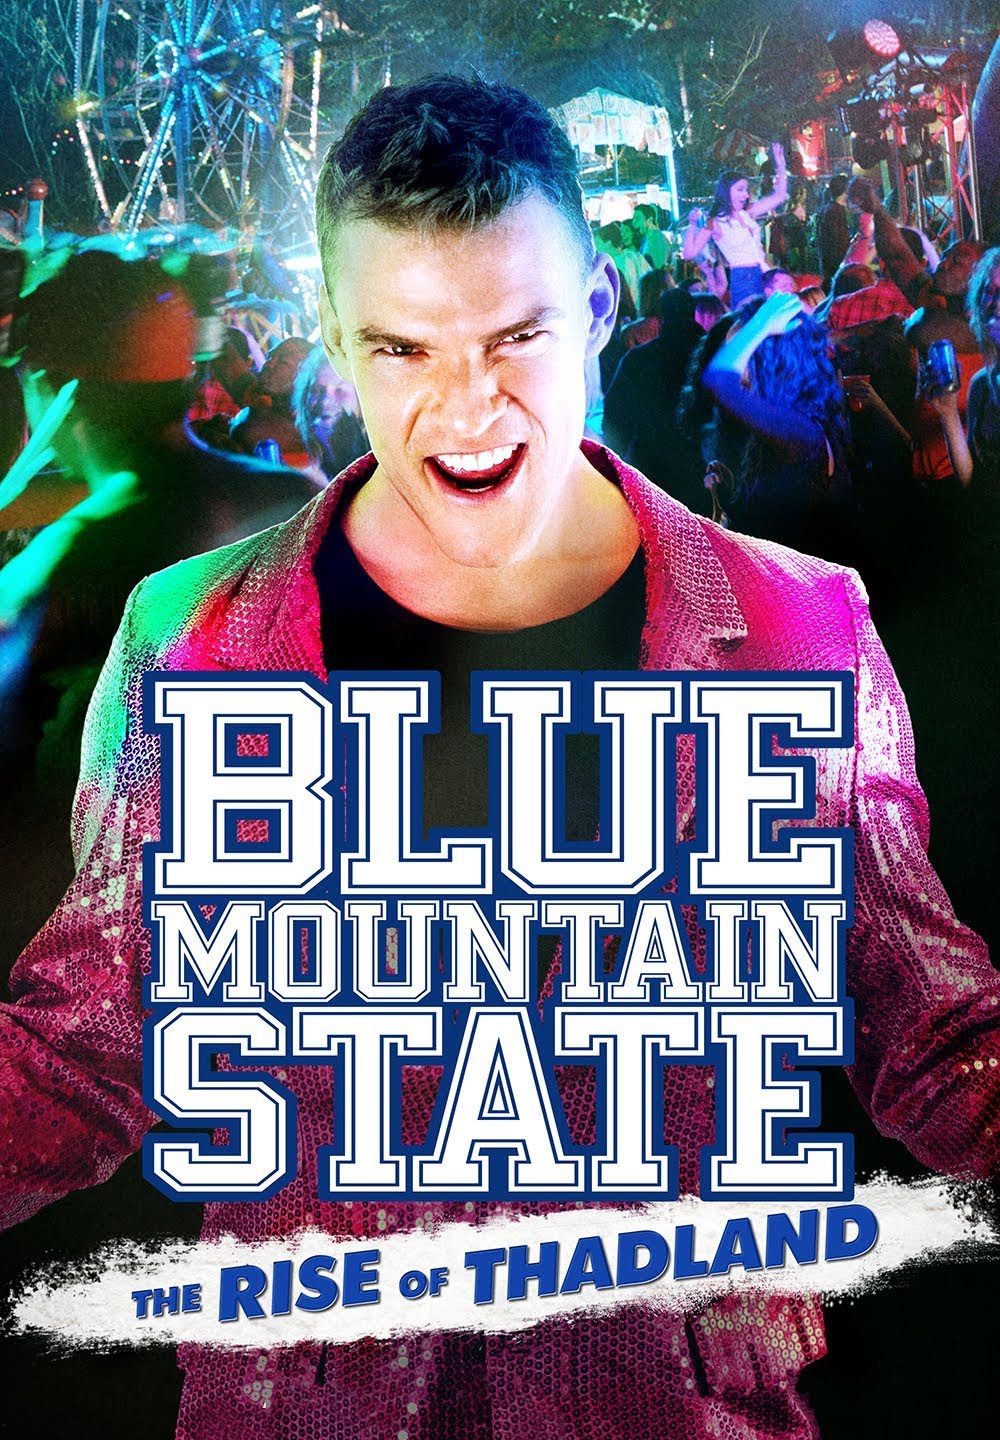 Blue Mountain State: The Rise of Thadland [HD] (2016)